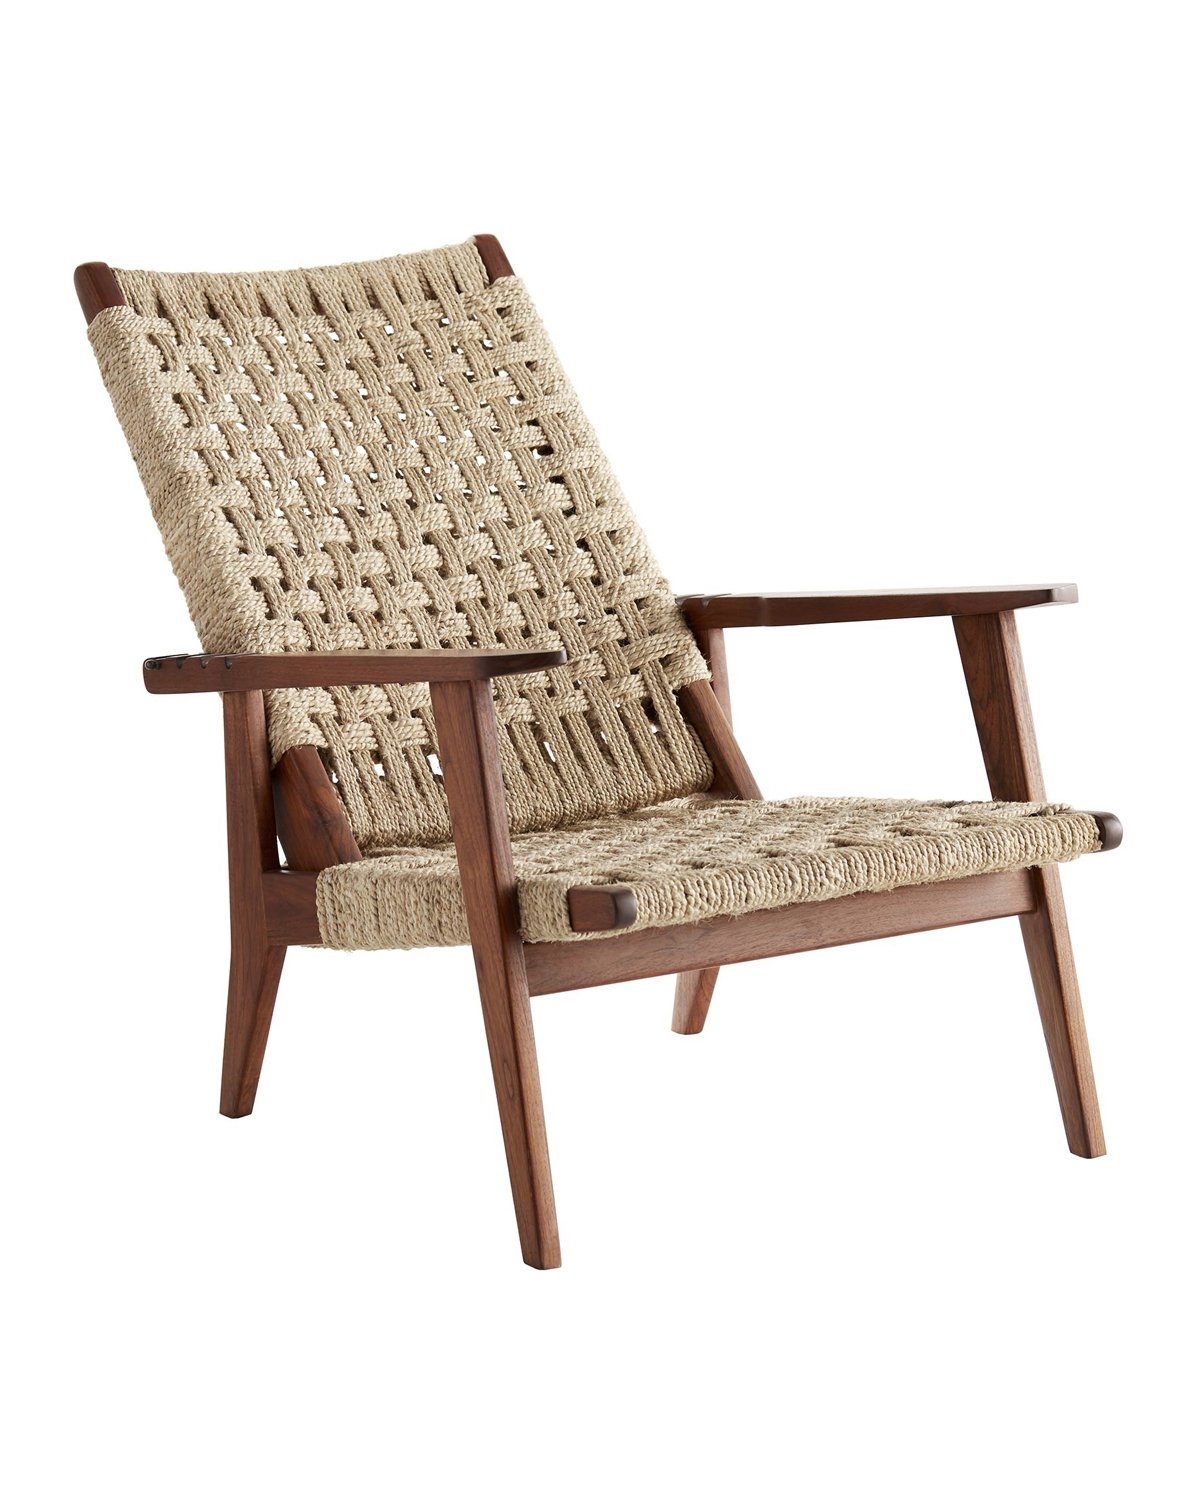 TILLY CHAIR - Image 1